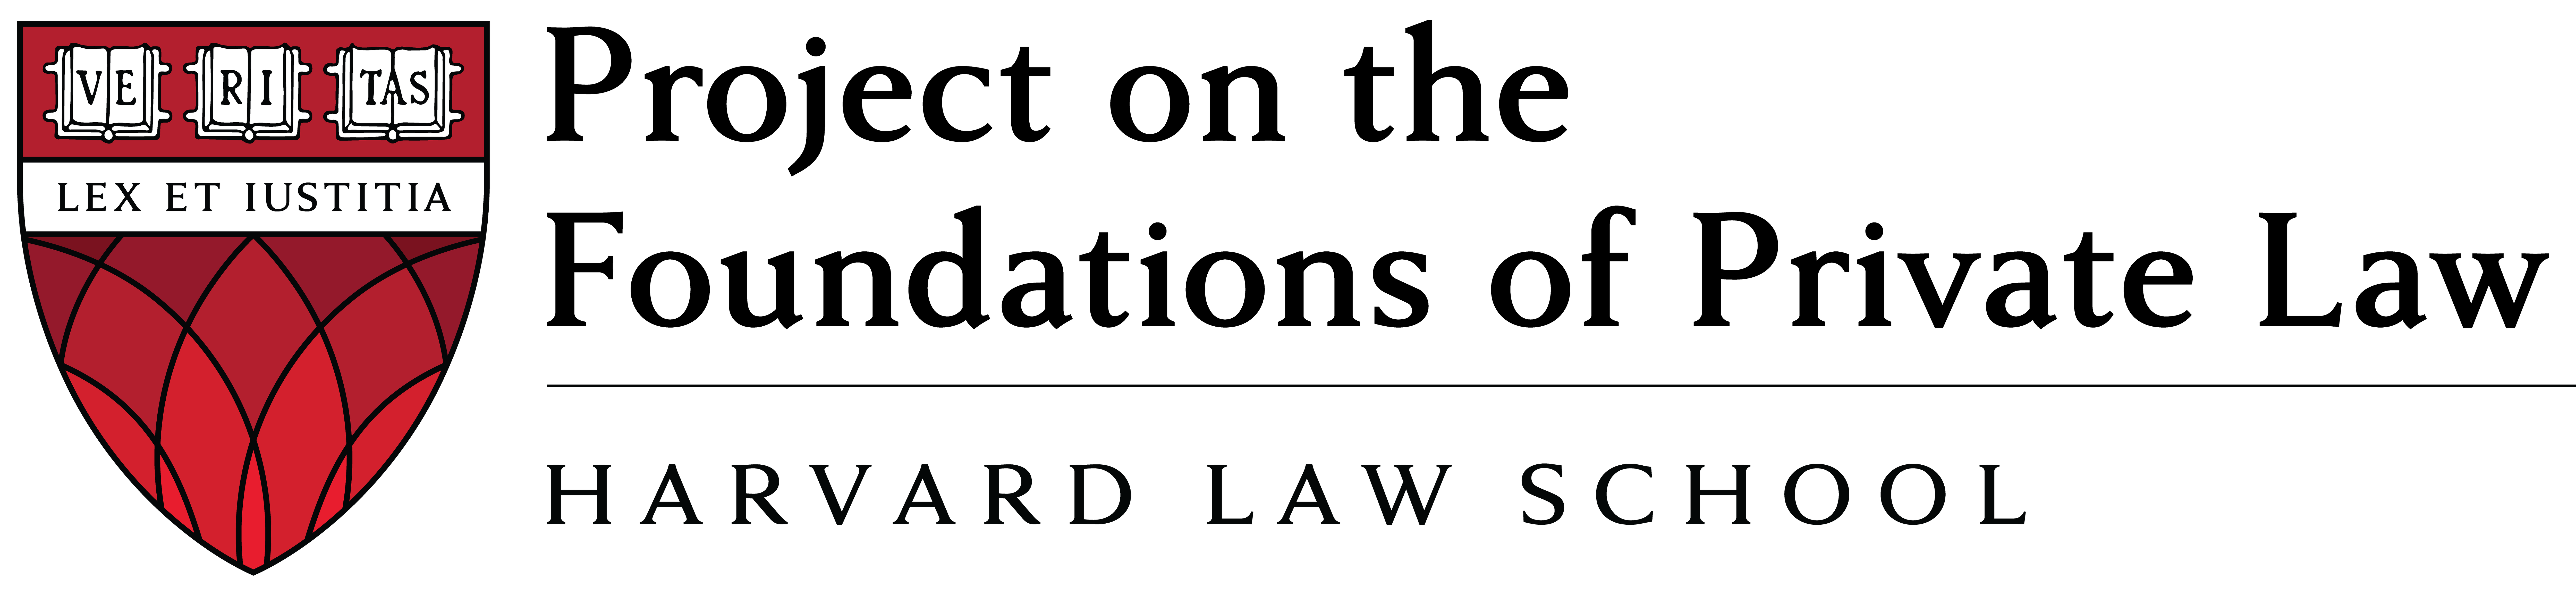 Project on the Foundations of Private Law